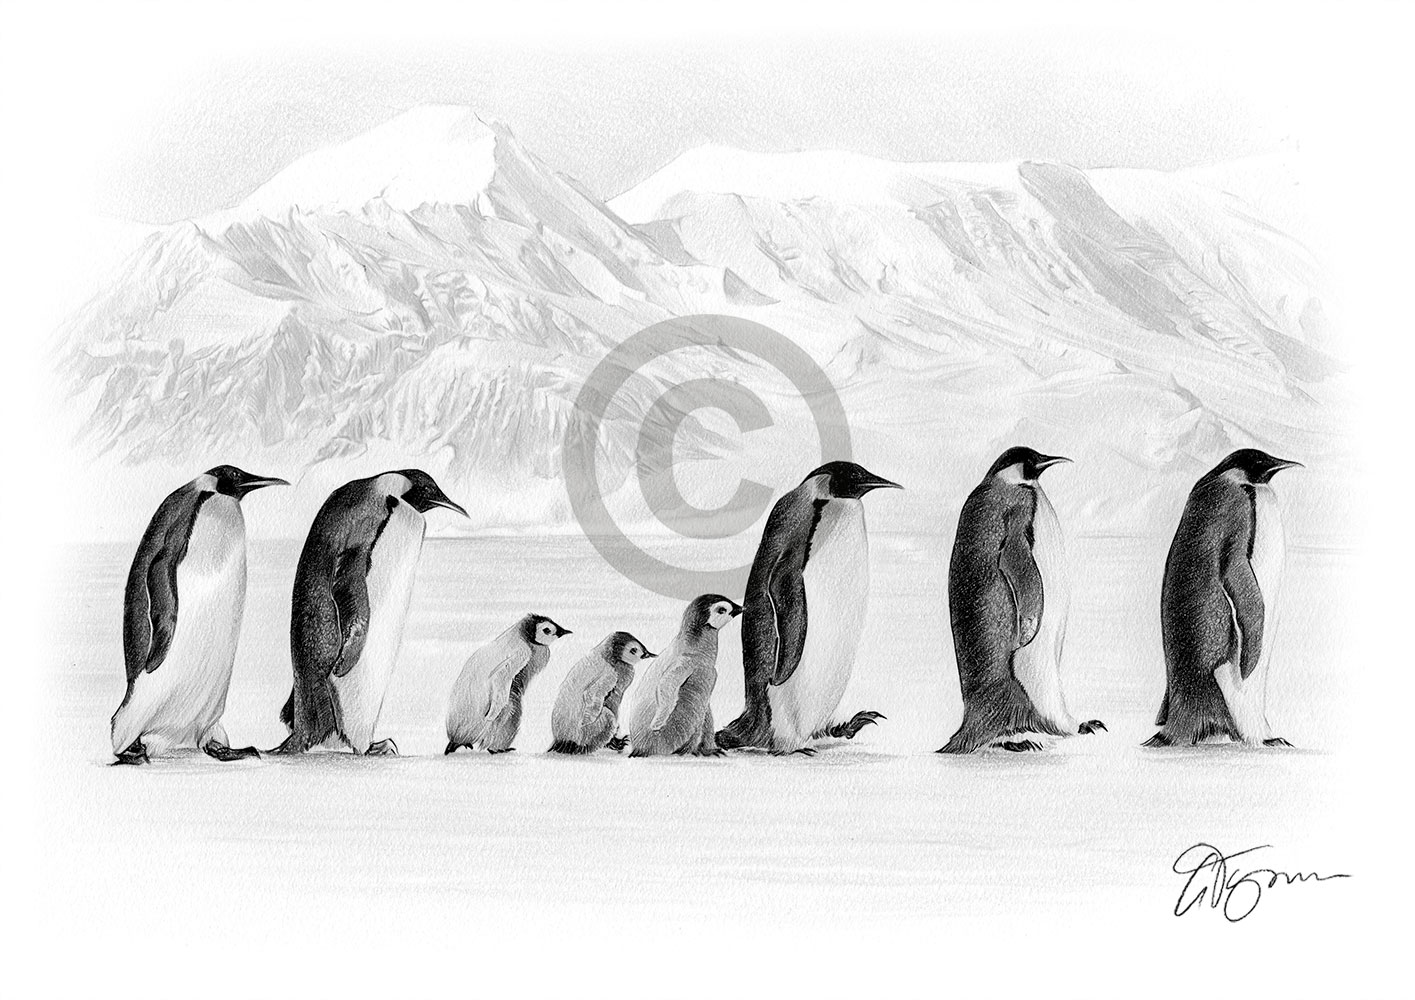 Pencil drawing of a group of penguins in Antarctica by artist Gary Tymon